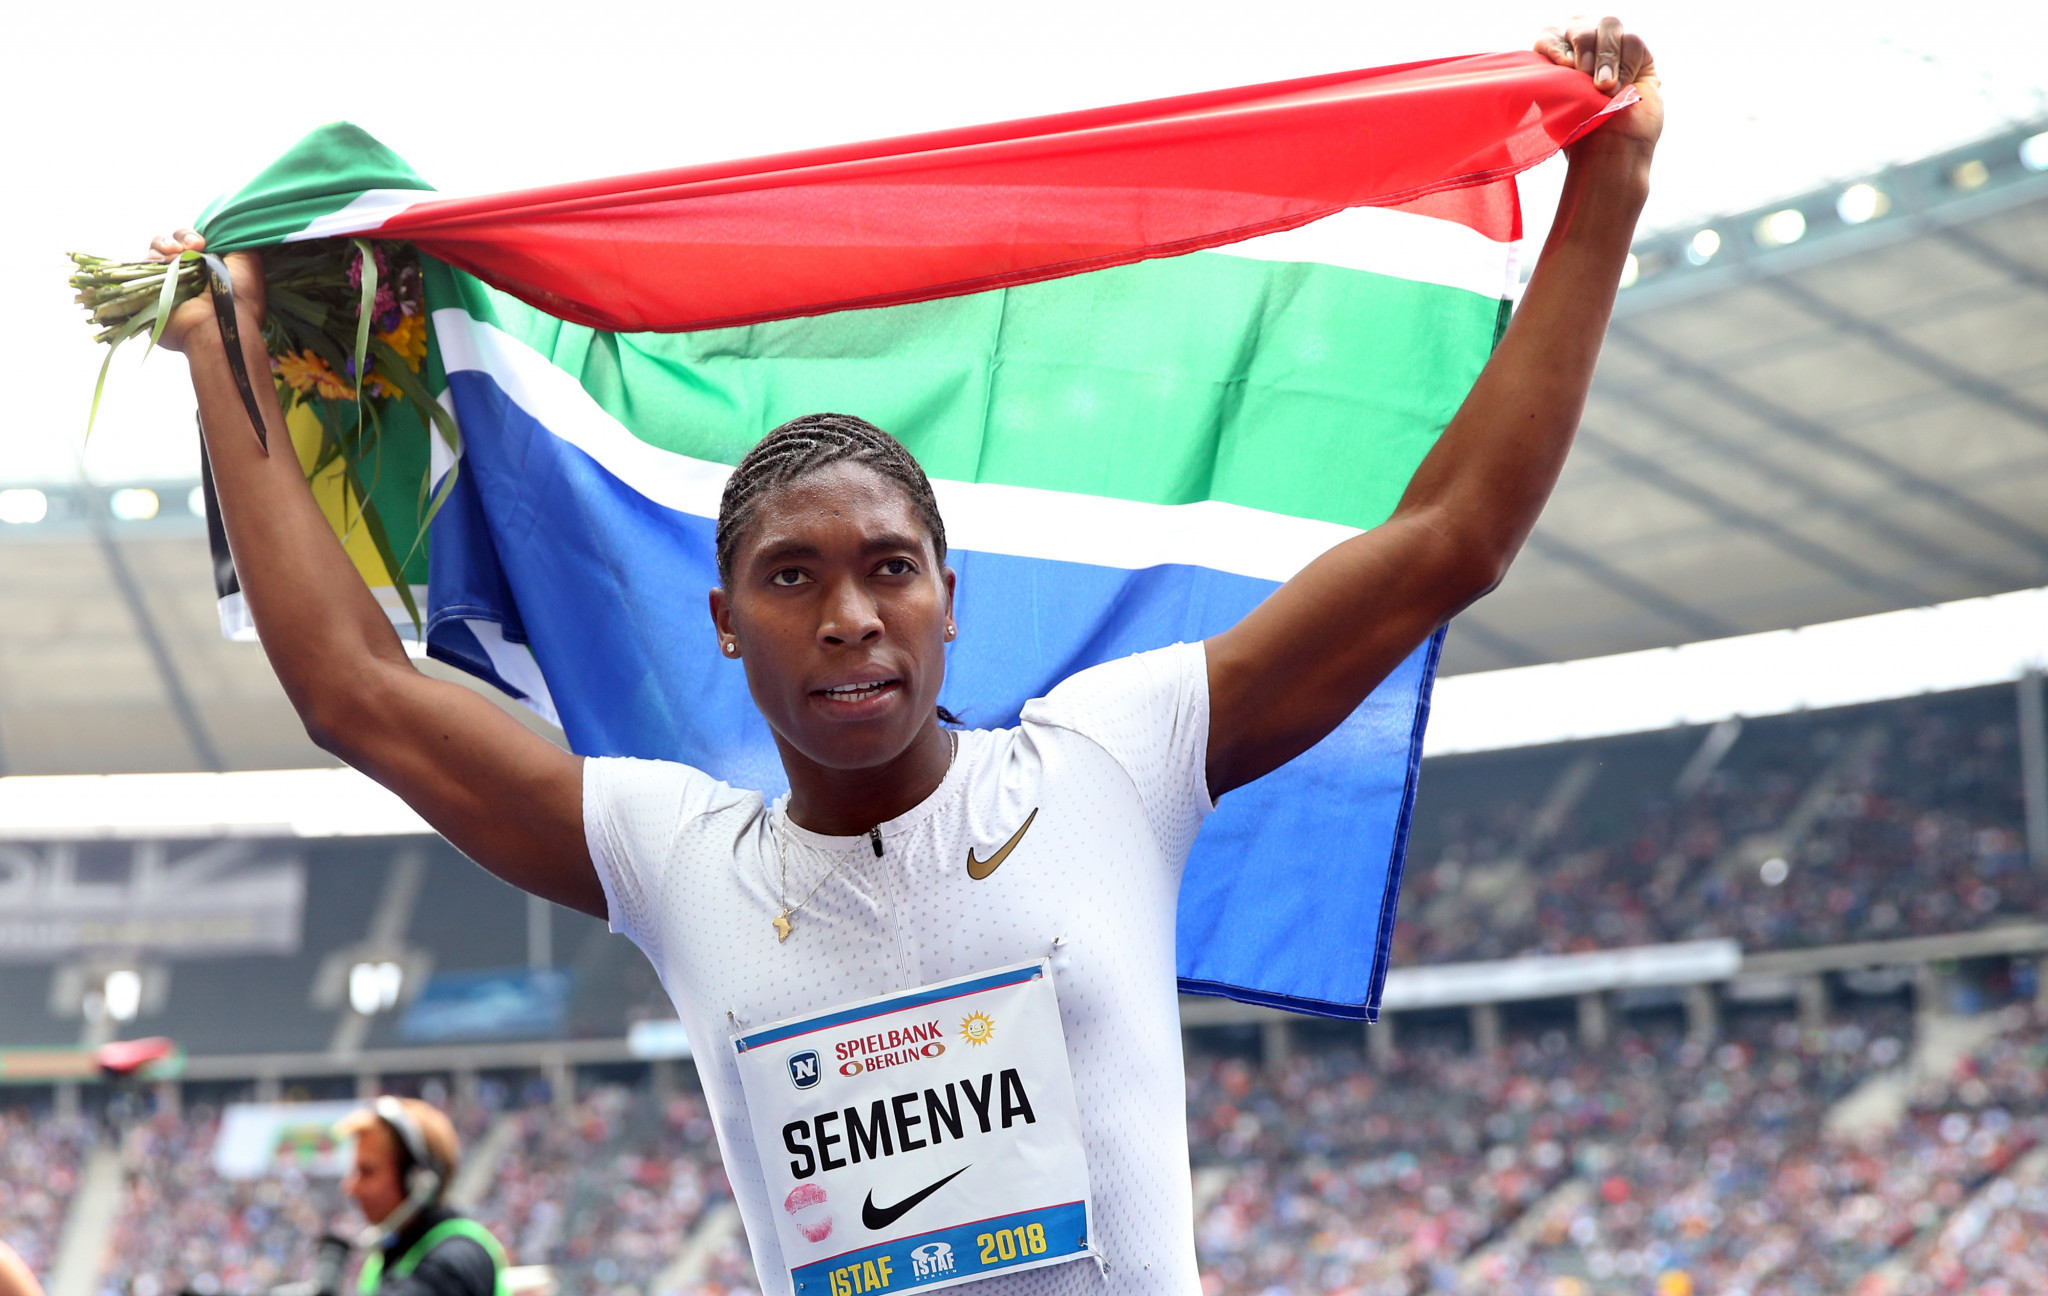 Caster Semenya is the most high-profile athlete due to be impacted by the new rules ©Getty Images